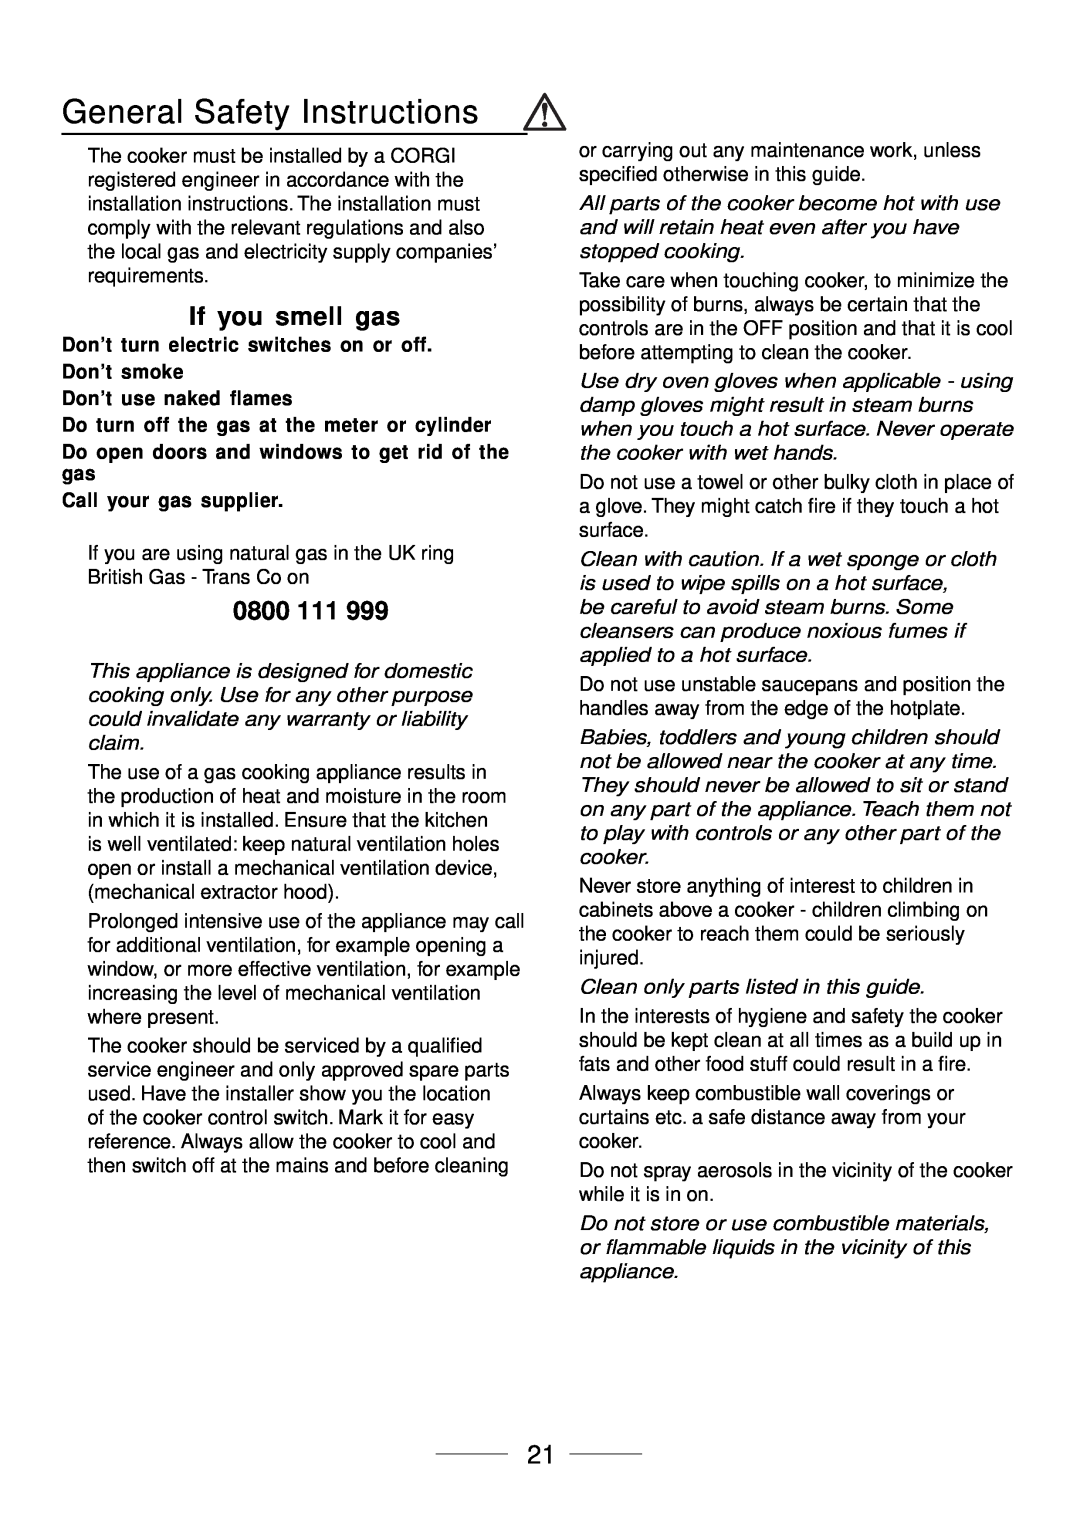 Maytag 110 installation instructions General Safety Instructions, If you smell gas, 0800 